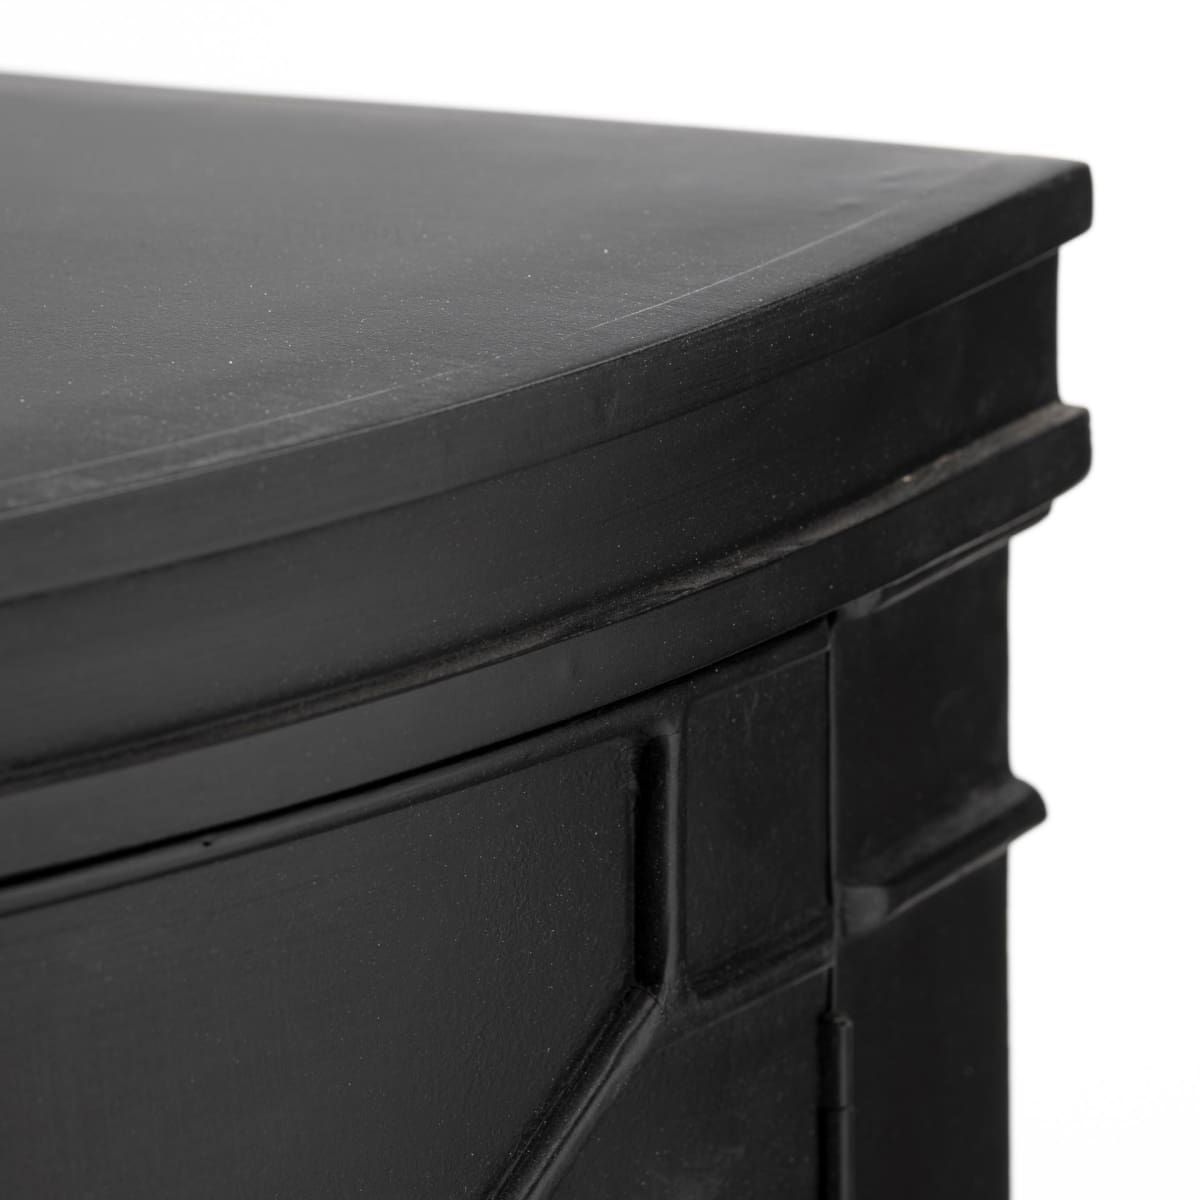 Romers Accent Cabinet Black Wood - acc-chest-cabinets